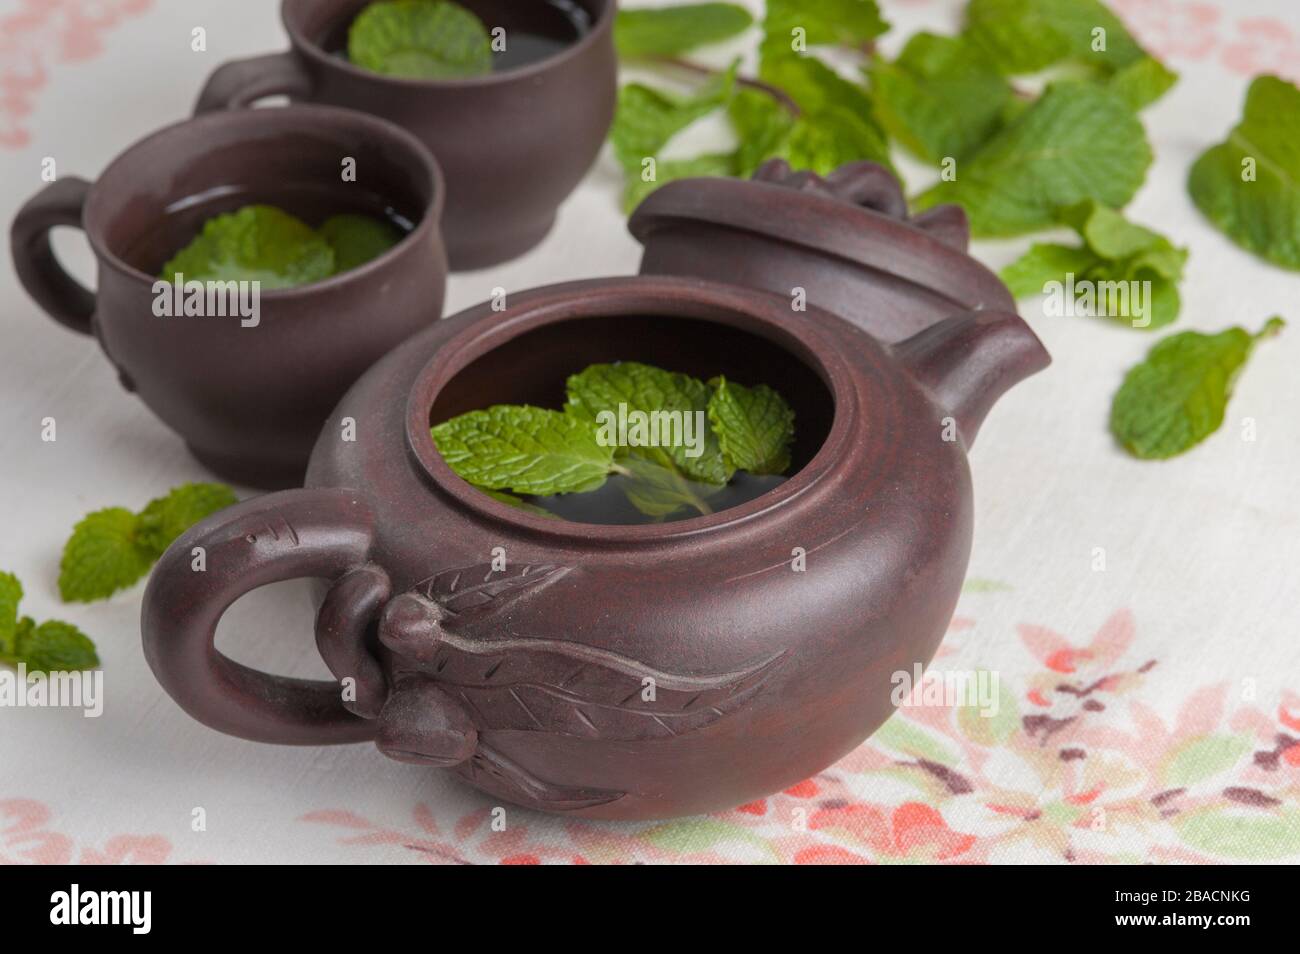 Yixing clay teapot and two tea cups with mint leaves Stock Photo